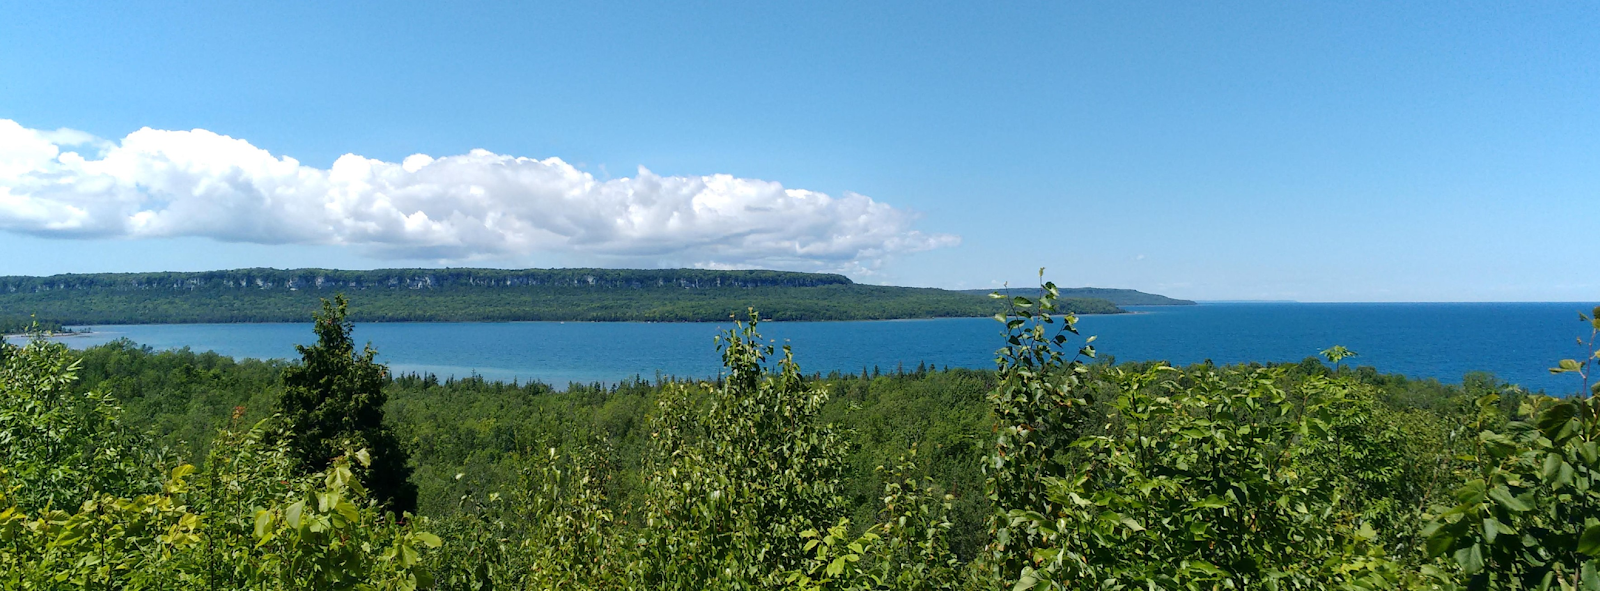 Territory of the Chippewas of Nawash Unceded First Nation, view from Sydney Bay Road, 2019